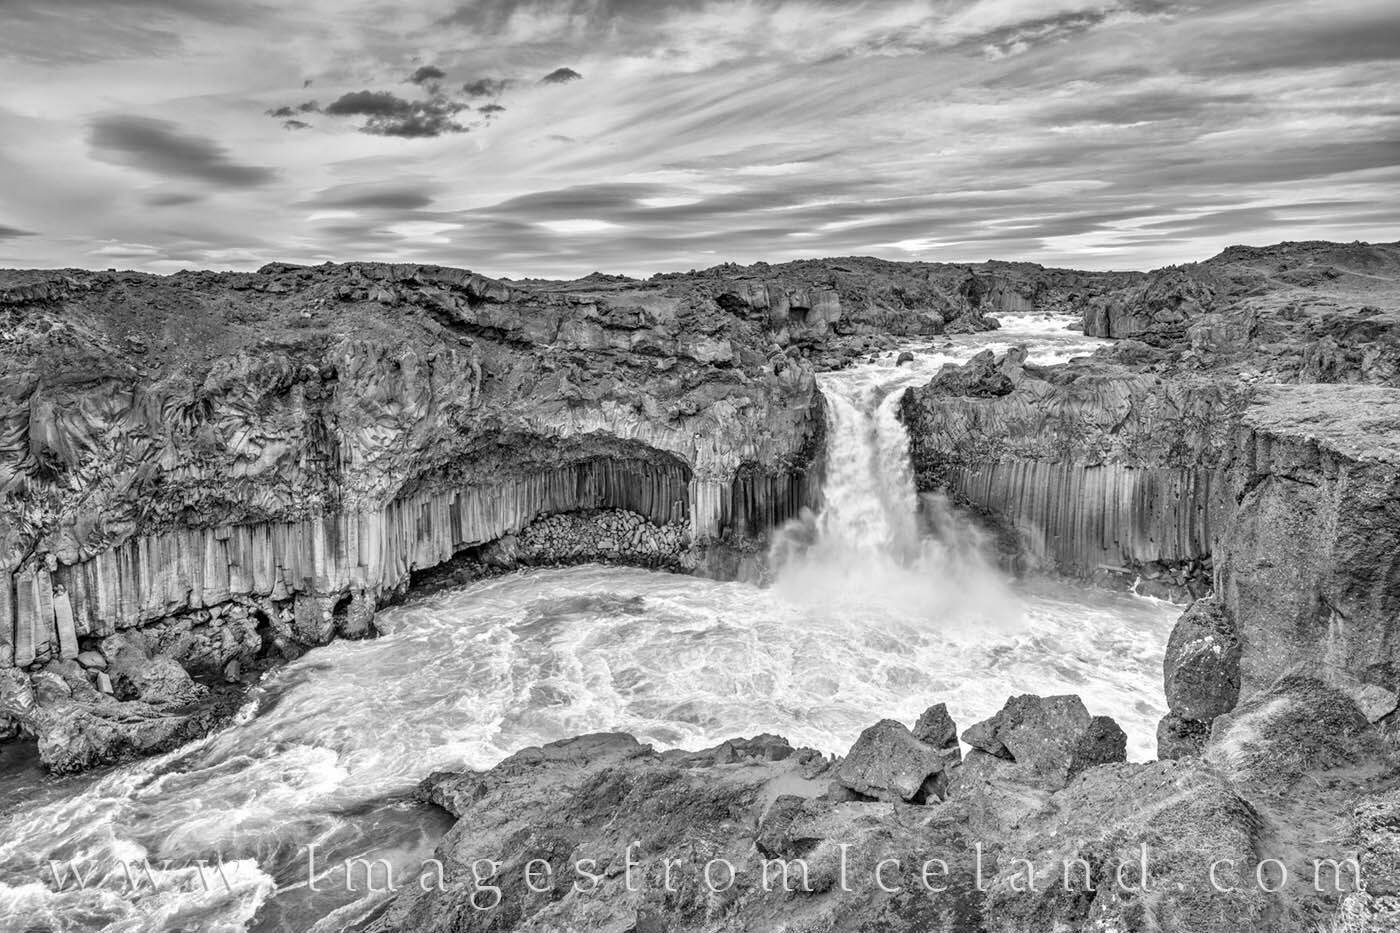 The beautiful waterfall, Aldeyjarfoss, lined with hexagonal basalt columns, plummets downward in its march to the Arctic Sea...